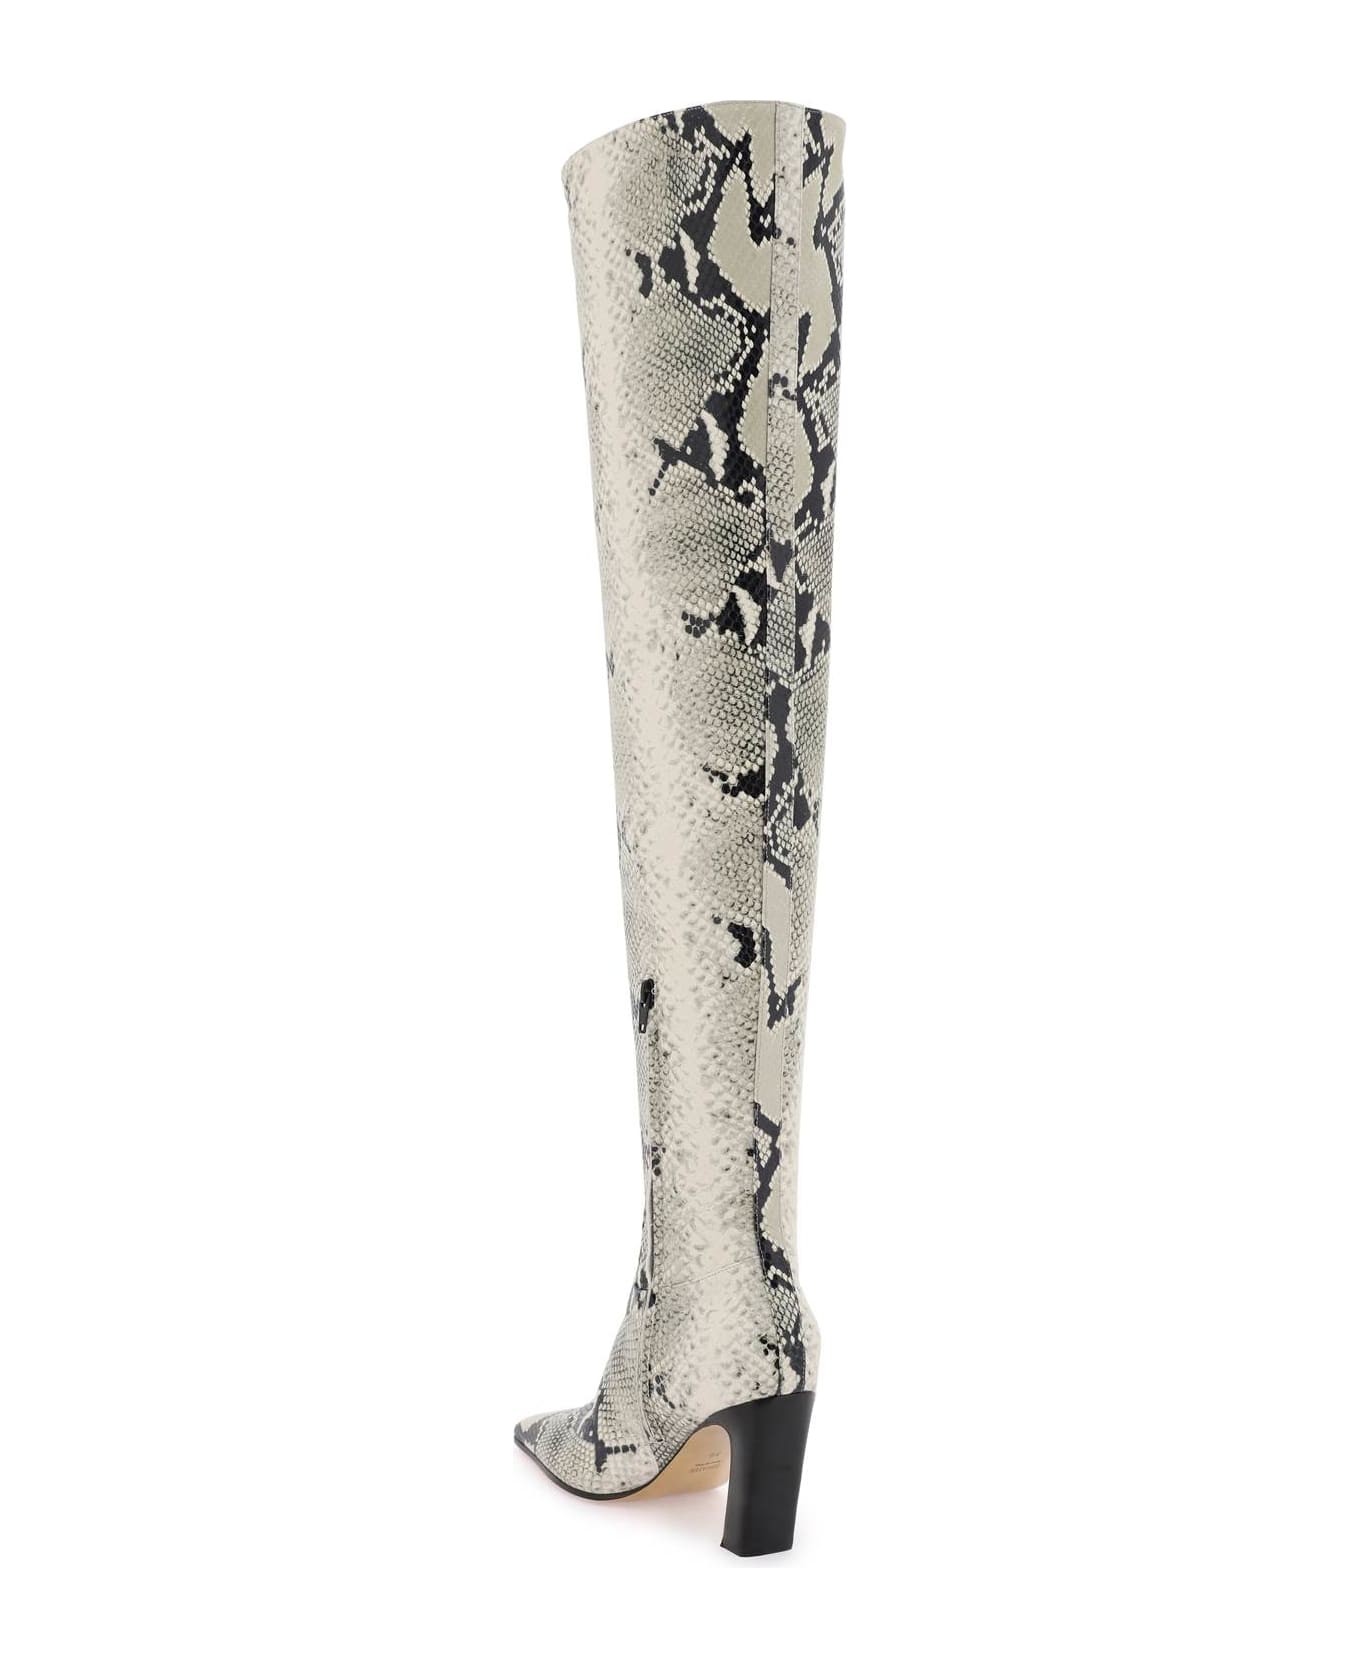 Khaite Printed Leather The Marfa Boots - NATURAL (Grey)